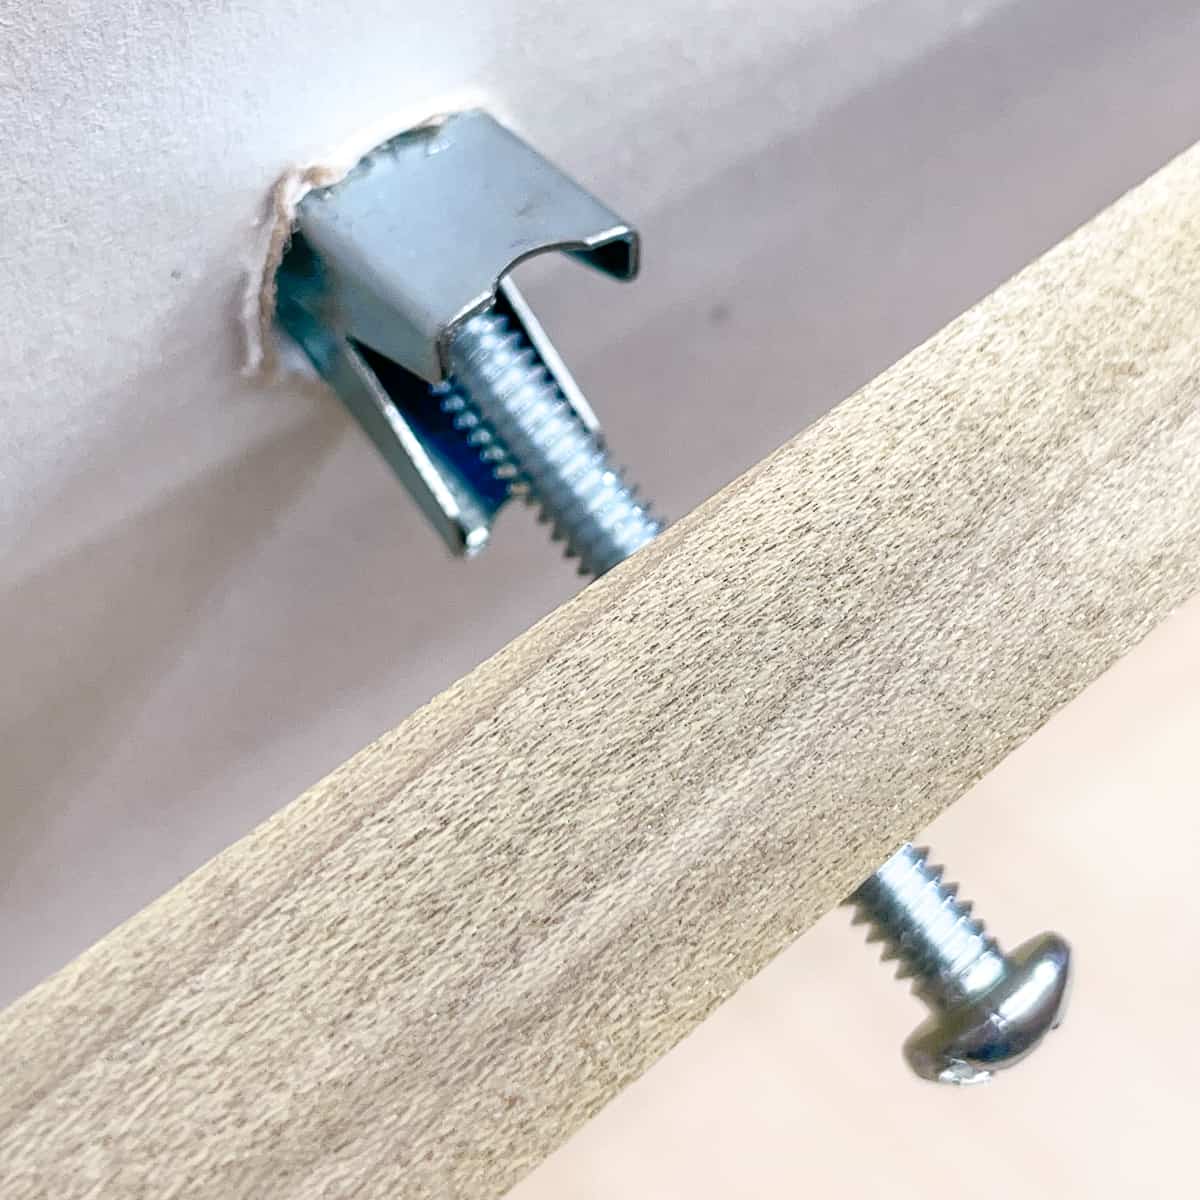 inserting toggle bolt into wall